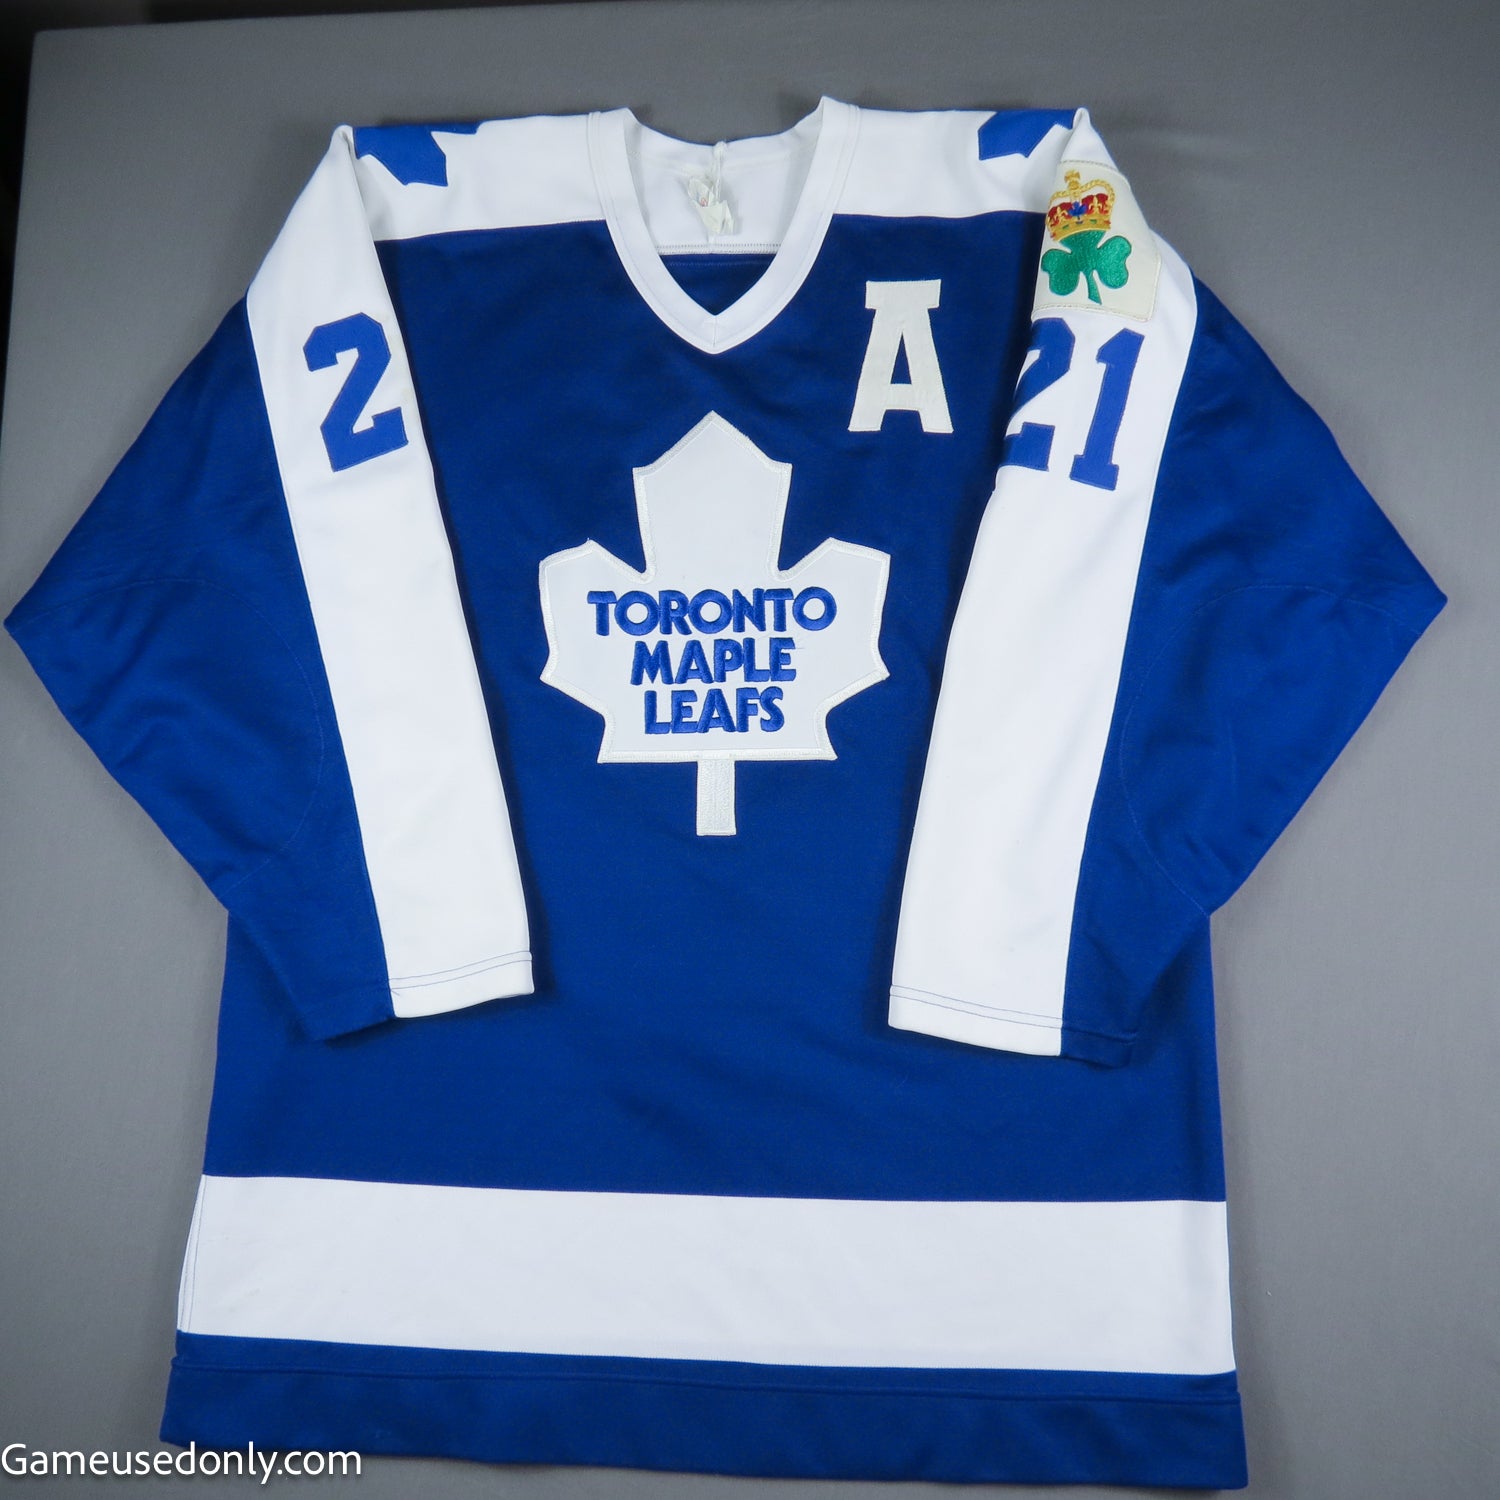 BÖRJE SALMING, TORONTO MAPLE LEAFS, signed hockey jersey, No. 21. Other -  Miscellaneous - Auctionet